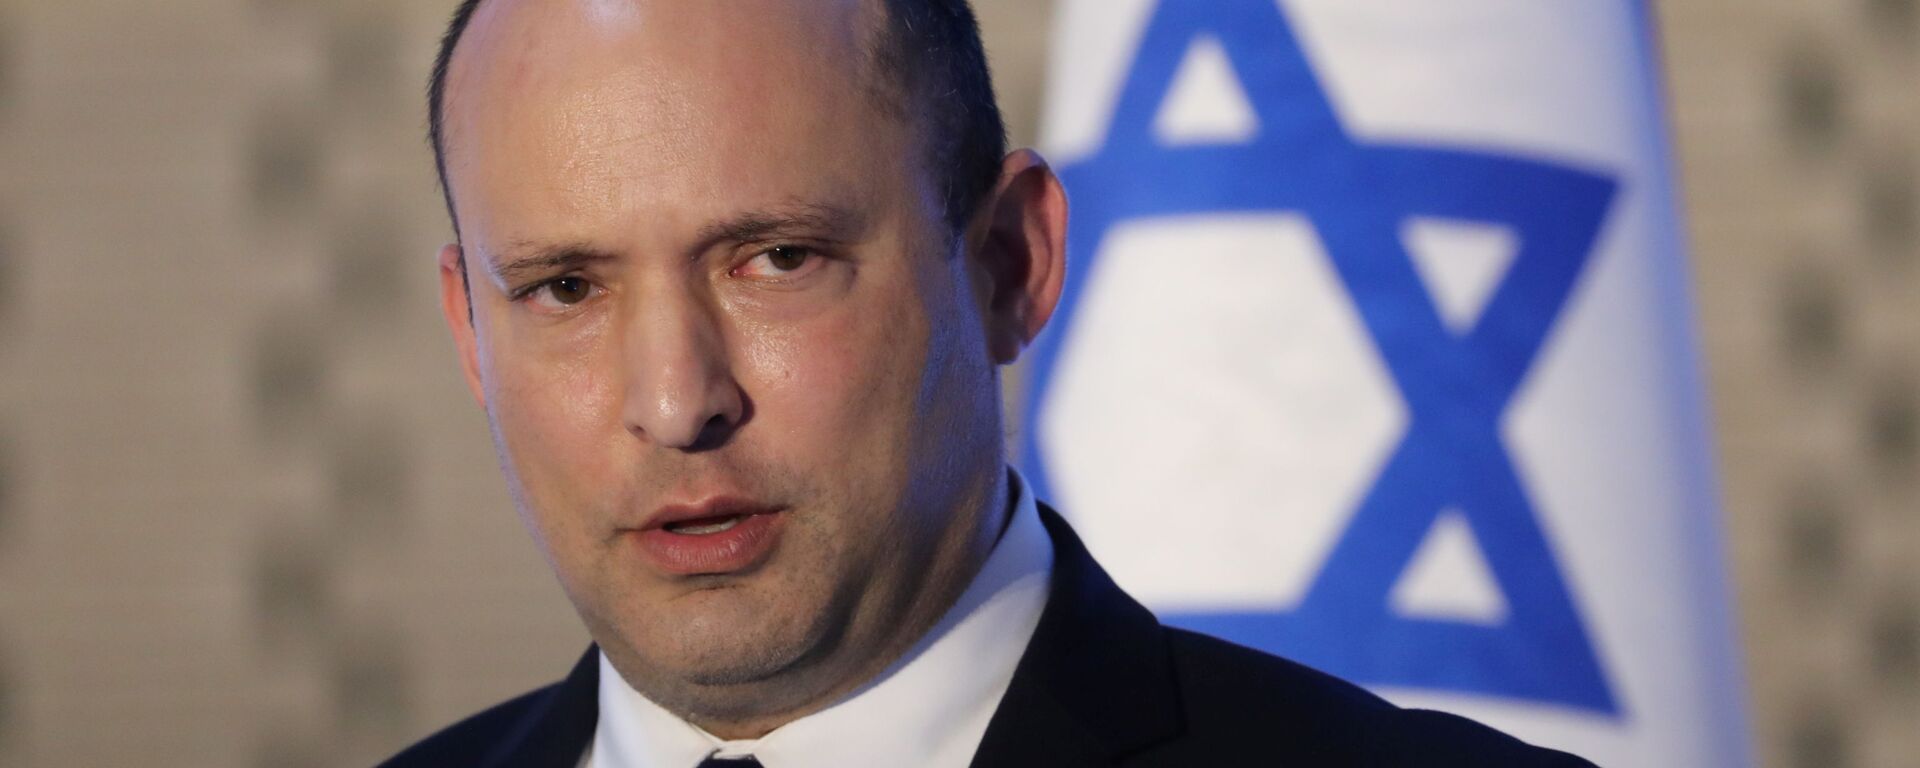 Israeli Prime Minister Naftali Bennett speaks during a memorial ceremony for soldiers who fell in the 2014 war with Gaza, at the Hall of Remembrance of Mount Herzl military cemetery in Jerusalem June 20, 2021 - Sputnik International, 1920, 23.11.2021